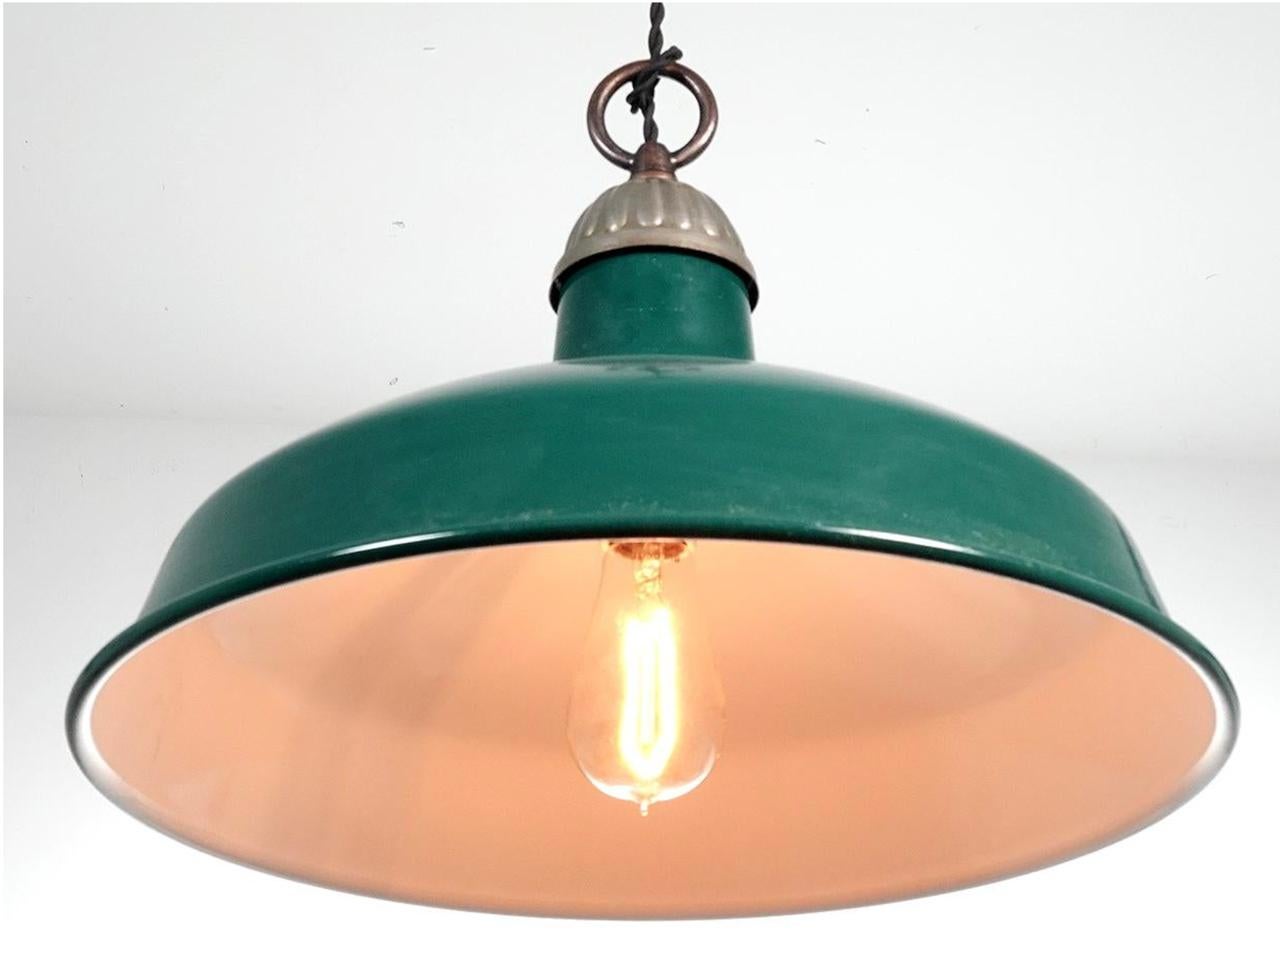 This was the type of simple industrial lamp often used in barns and factories. We found a good collection of these and all are in beautiful unused condition. New Old Stock. They have an impressive 16 inch diameter. The top is crowned by a small